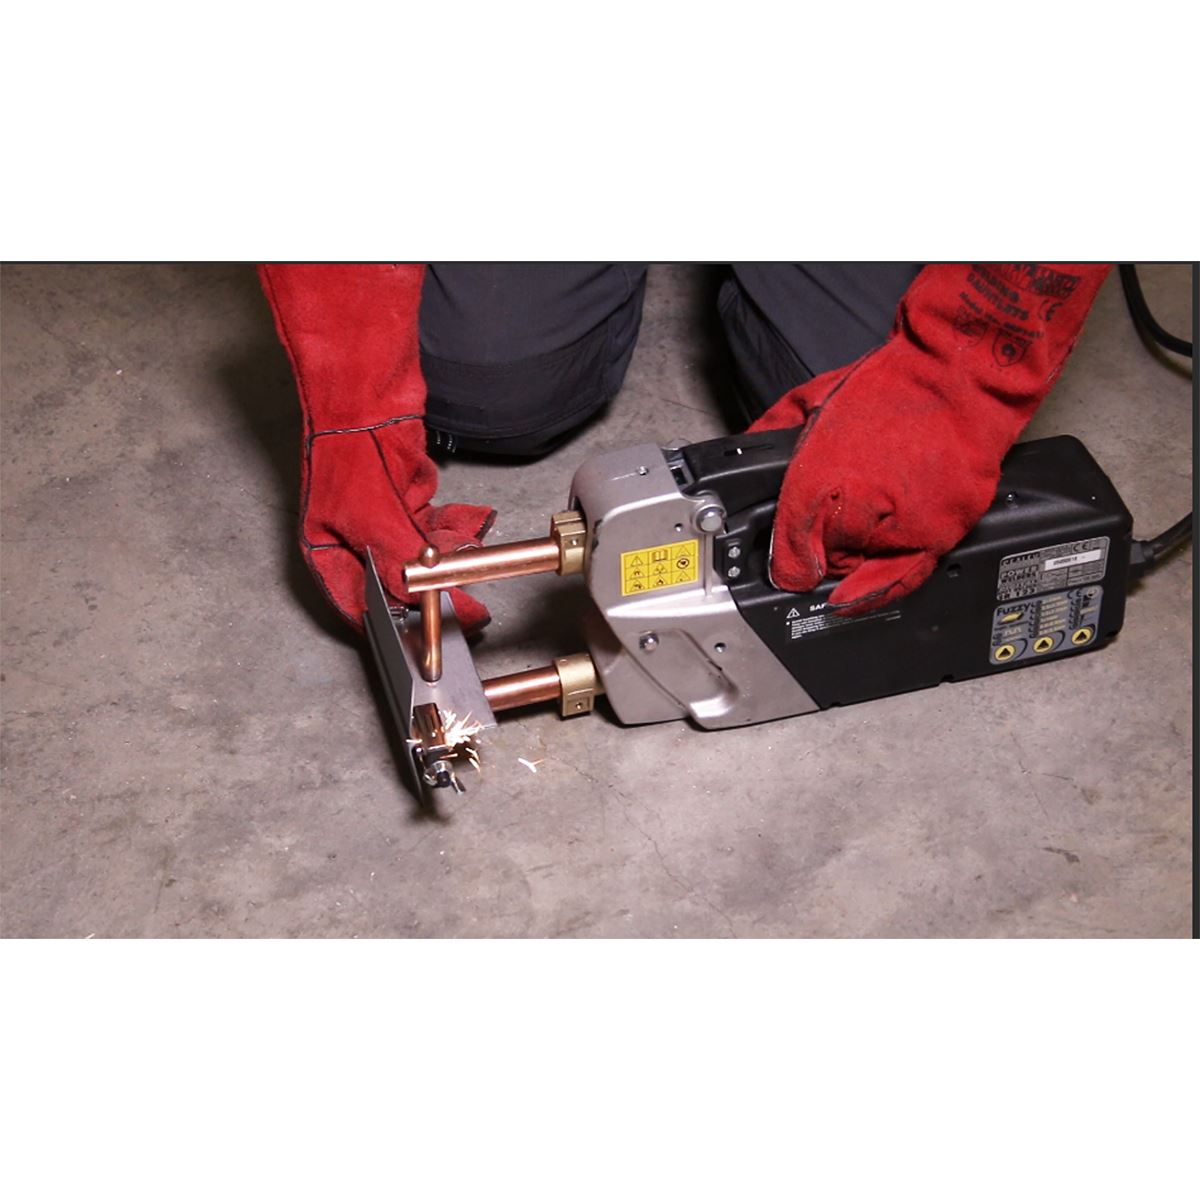 Sealey Spot Welder with Timer